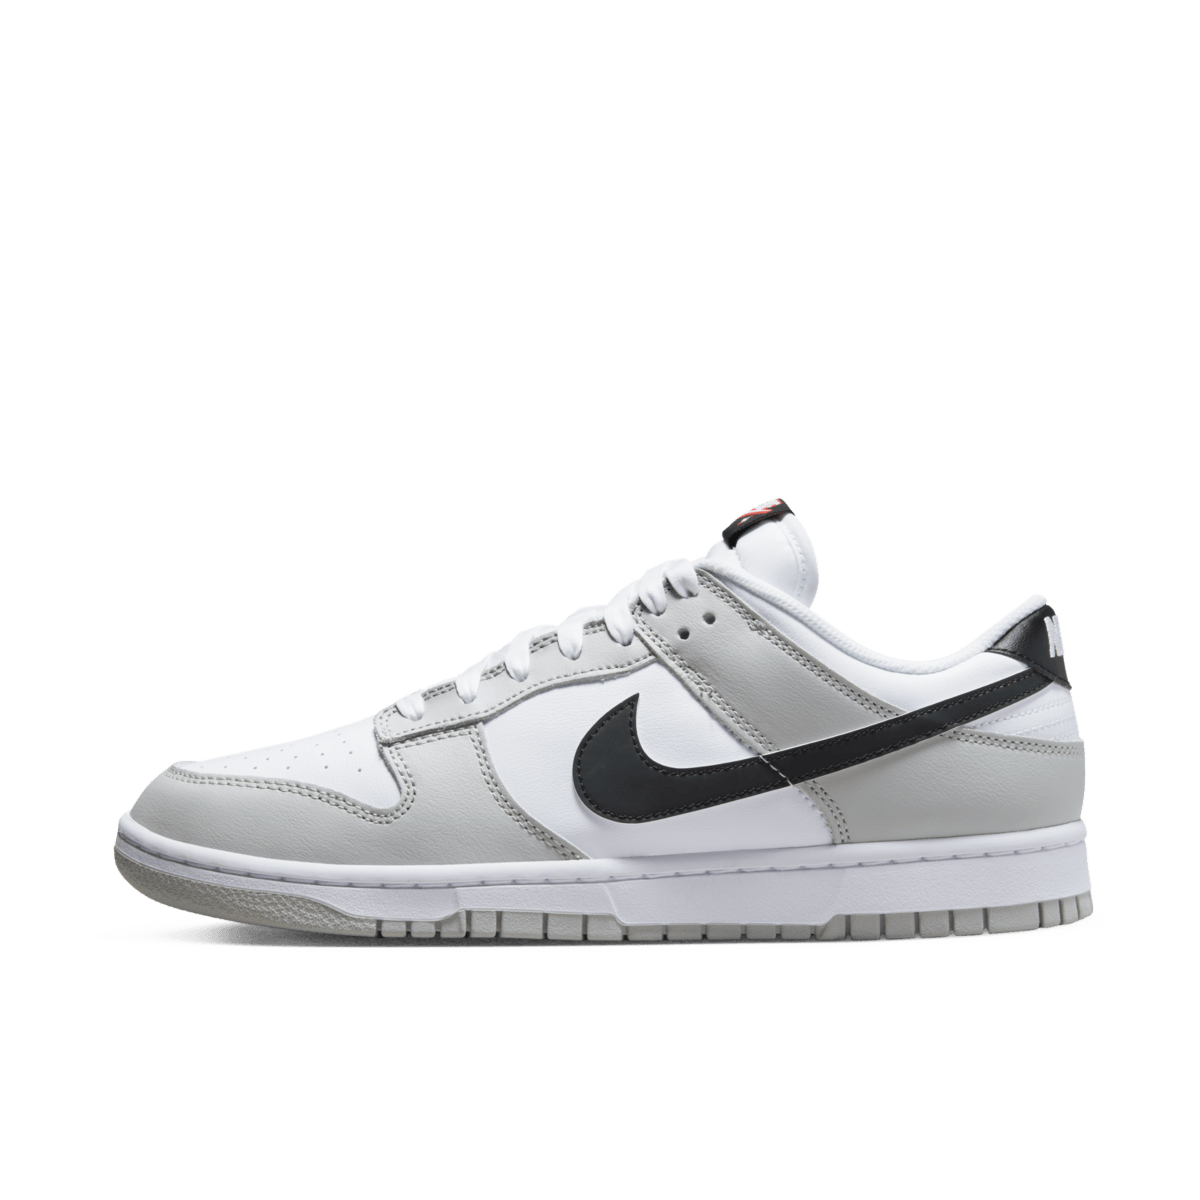 Nike Dunk Low 'Grey' - Lottery Pack